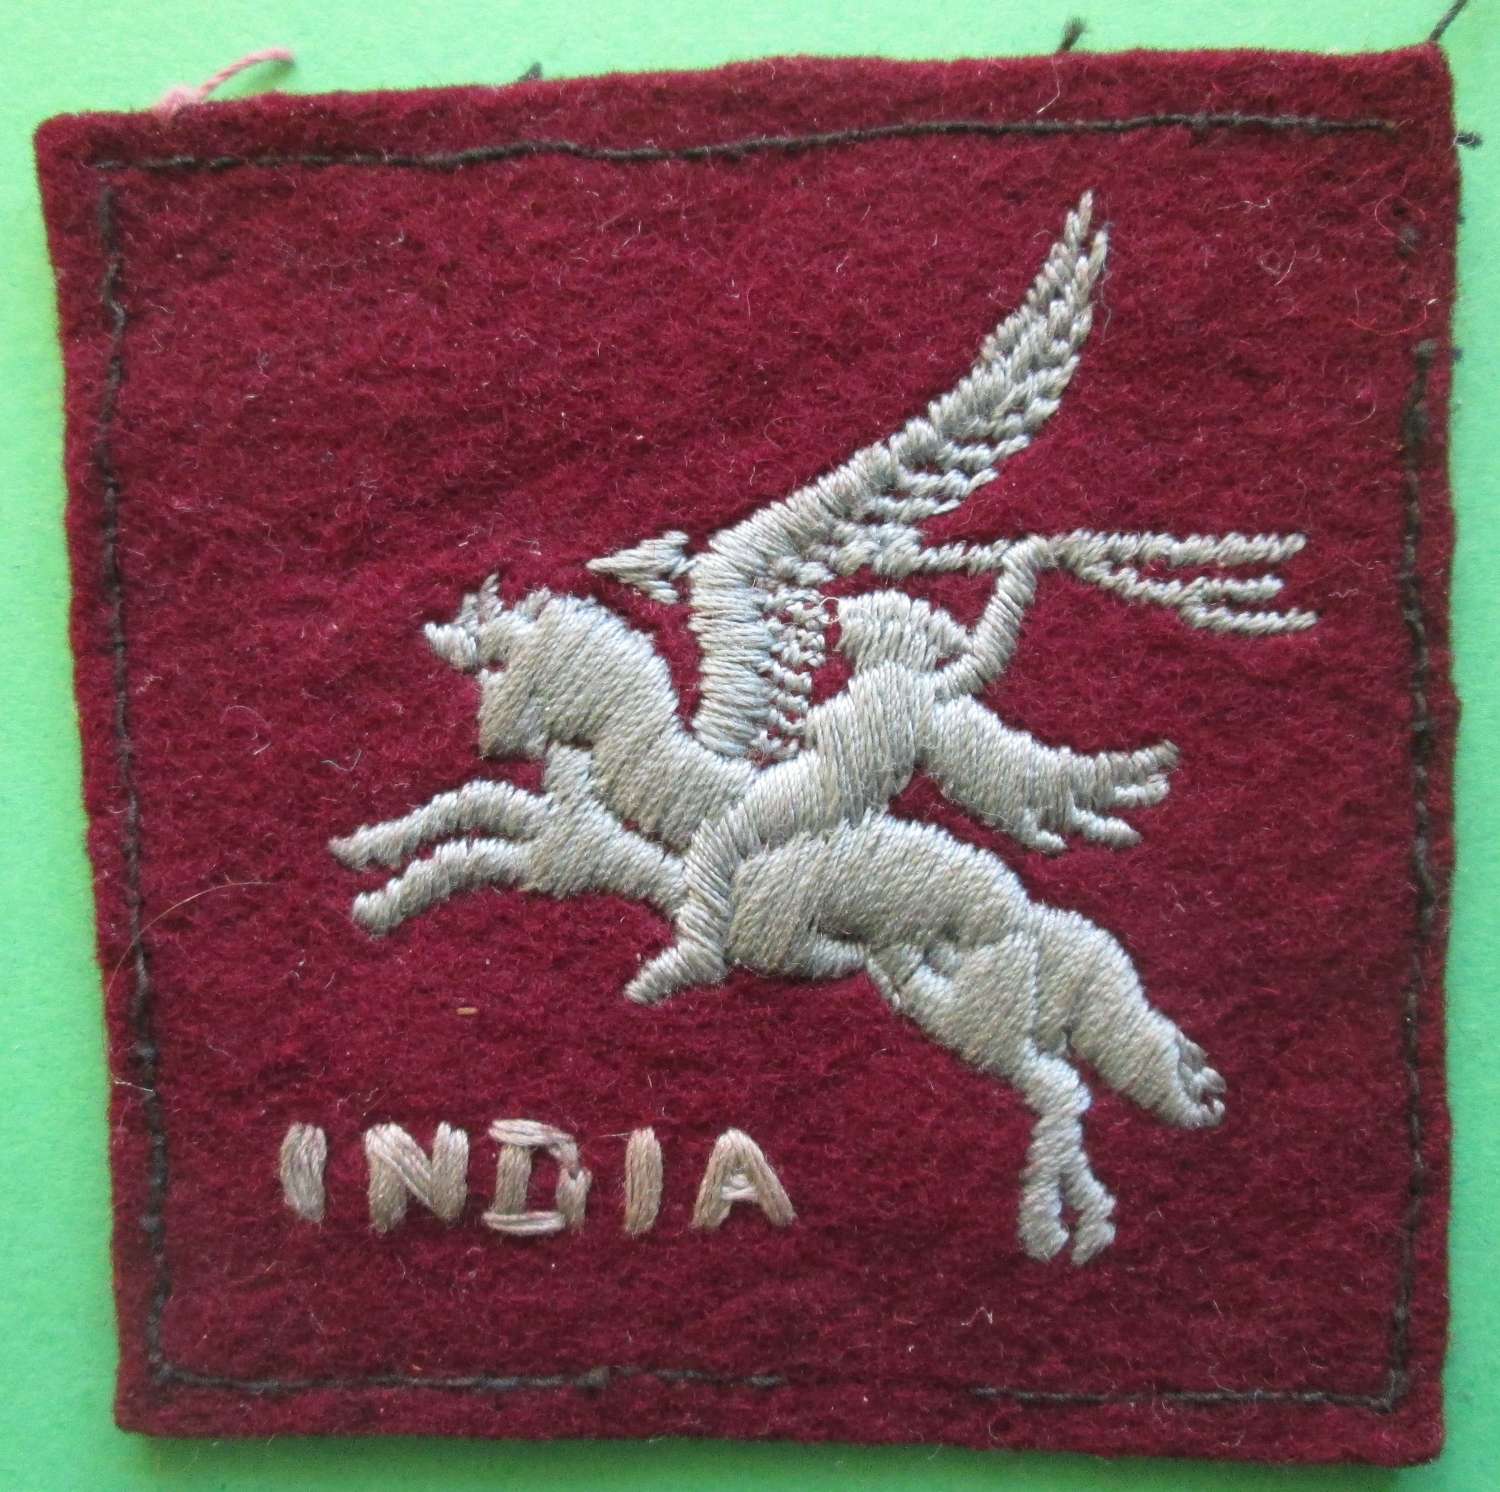 A 44TH INDIA AIRBORNE DIVISION SIGN